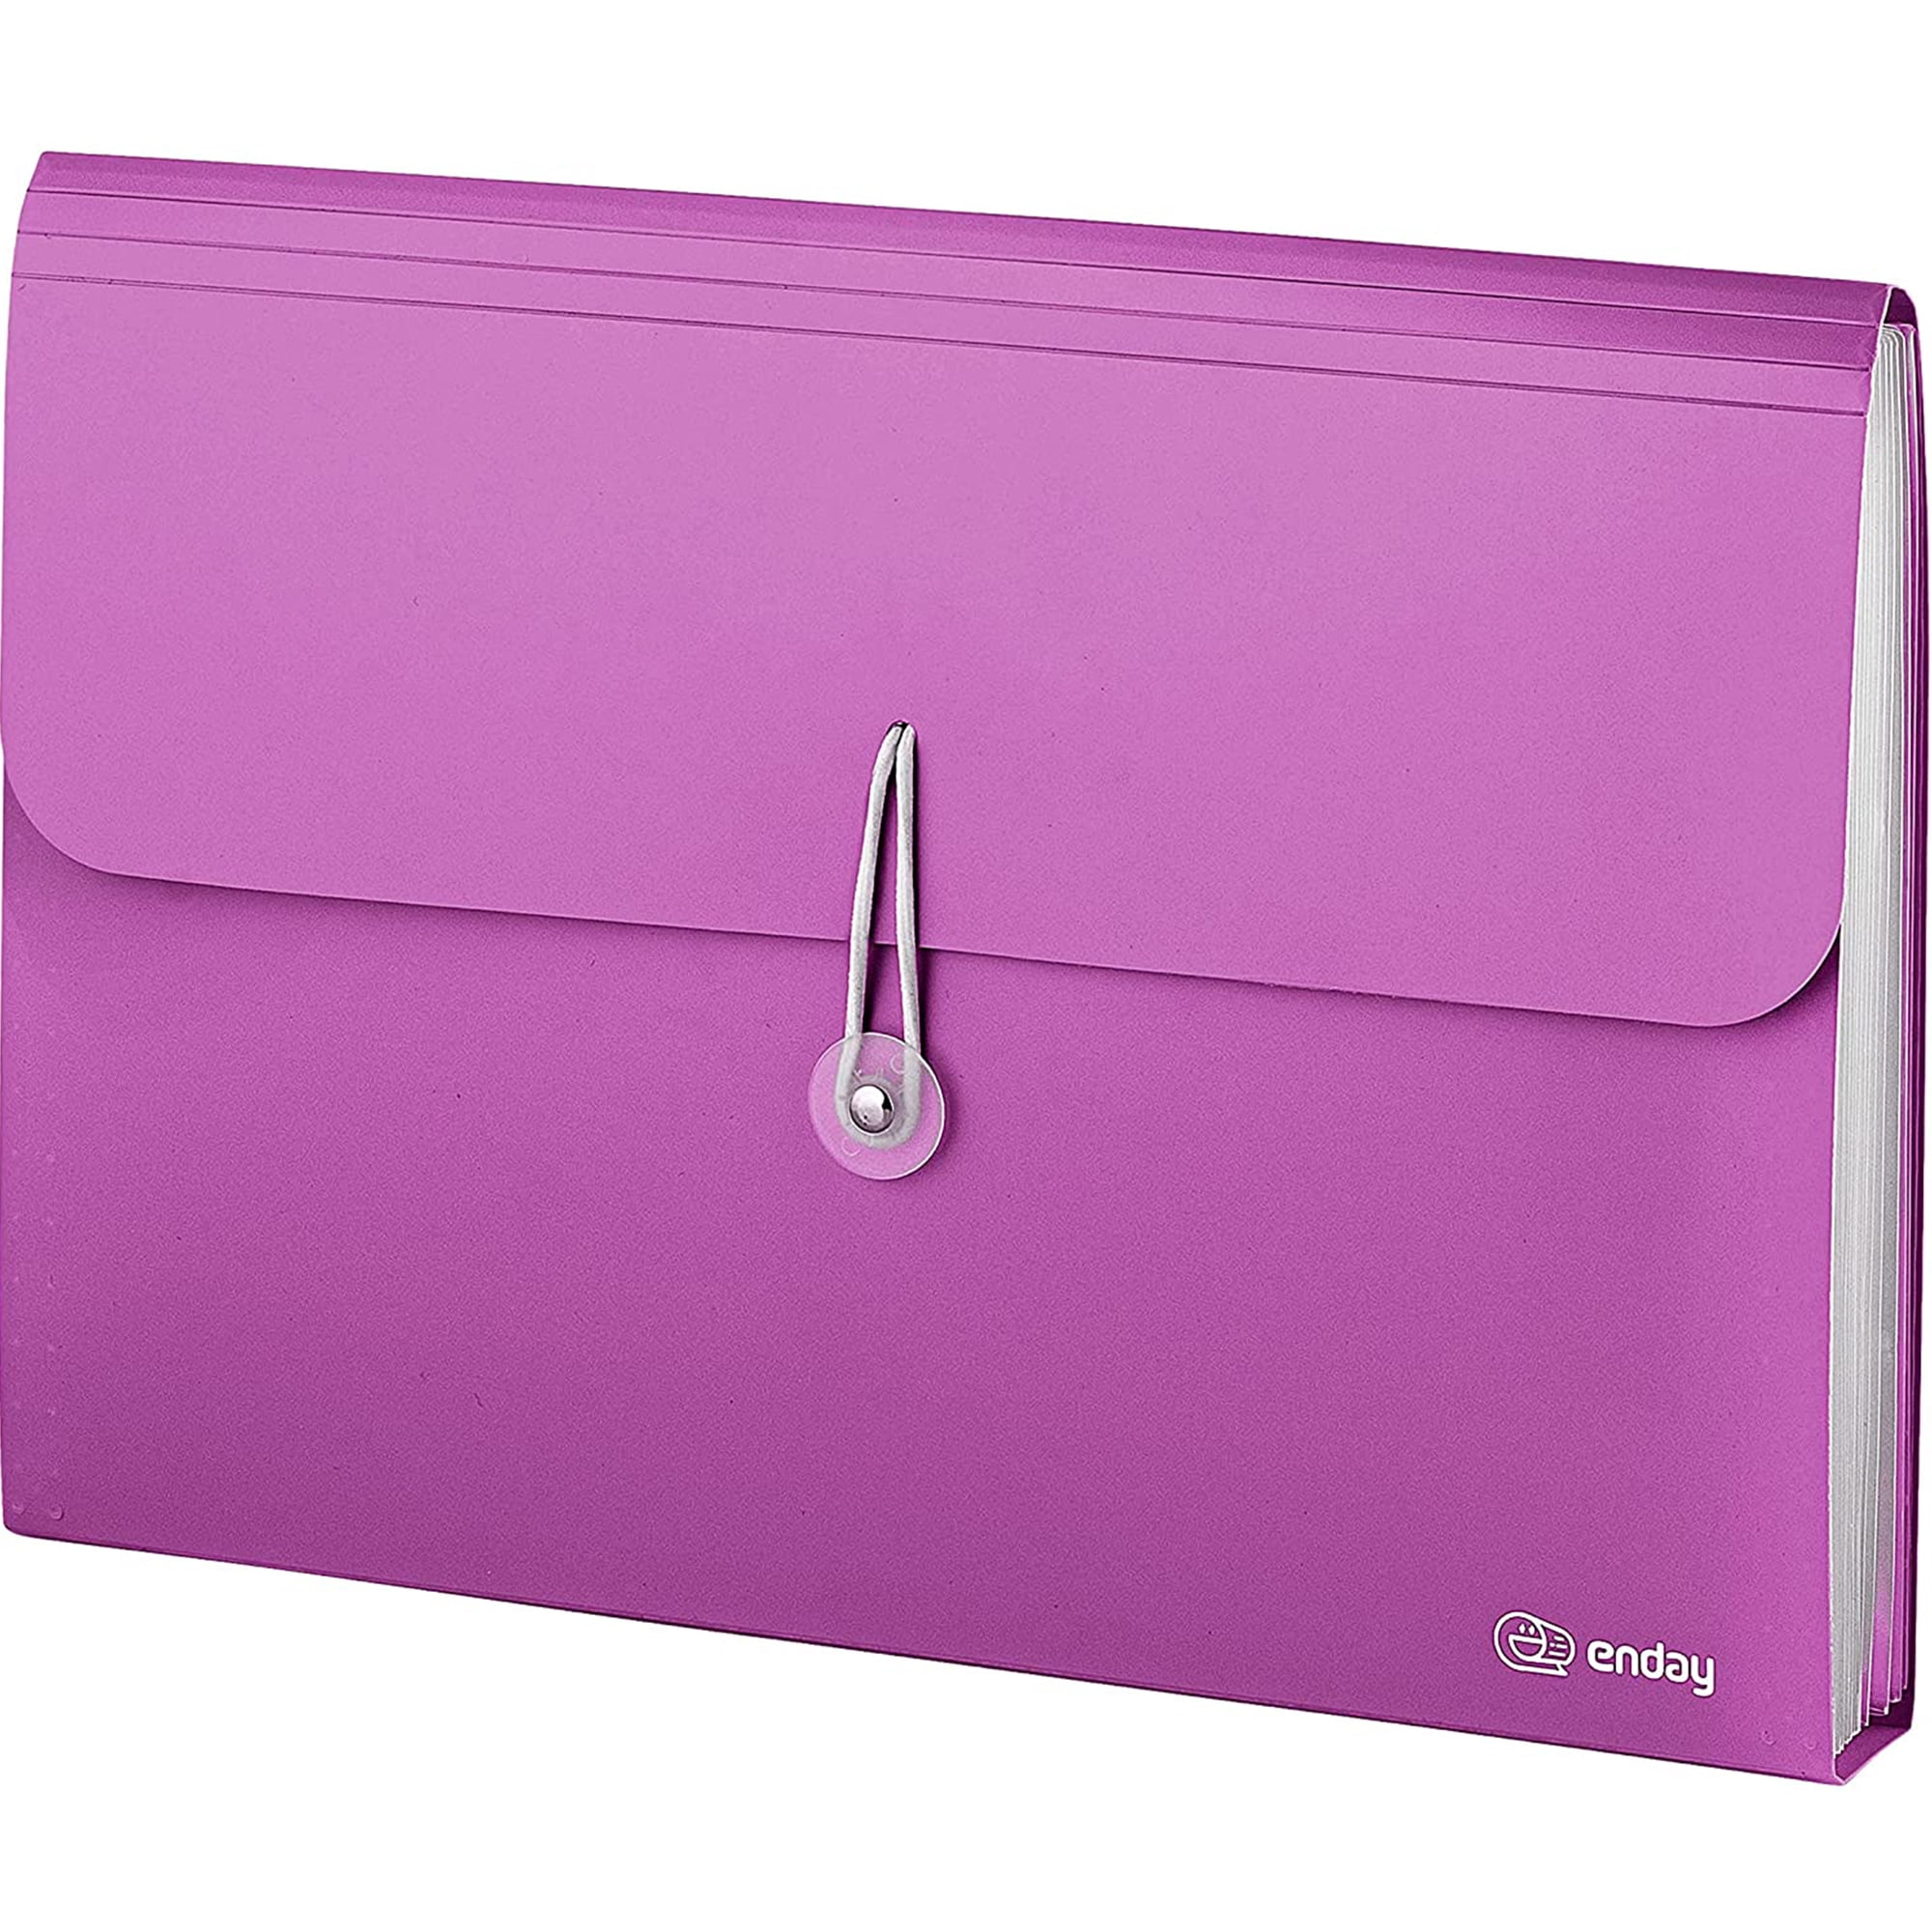 PAPERIAN Recycled paper A4 document envelope file folder